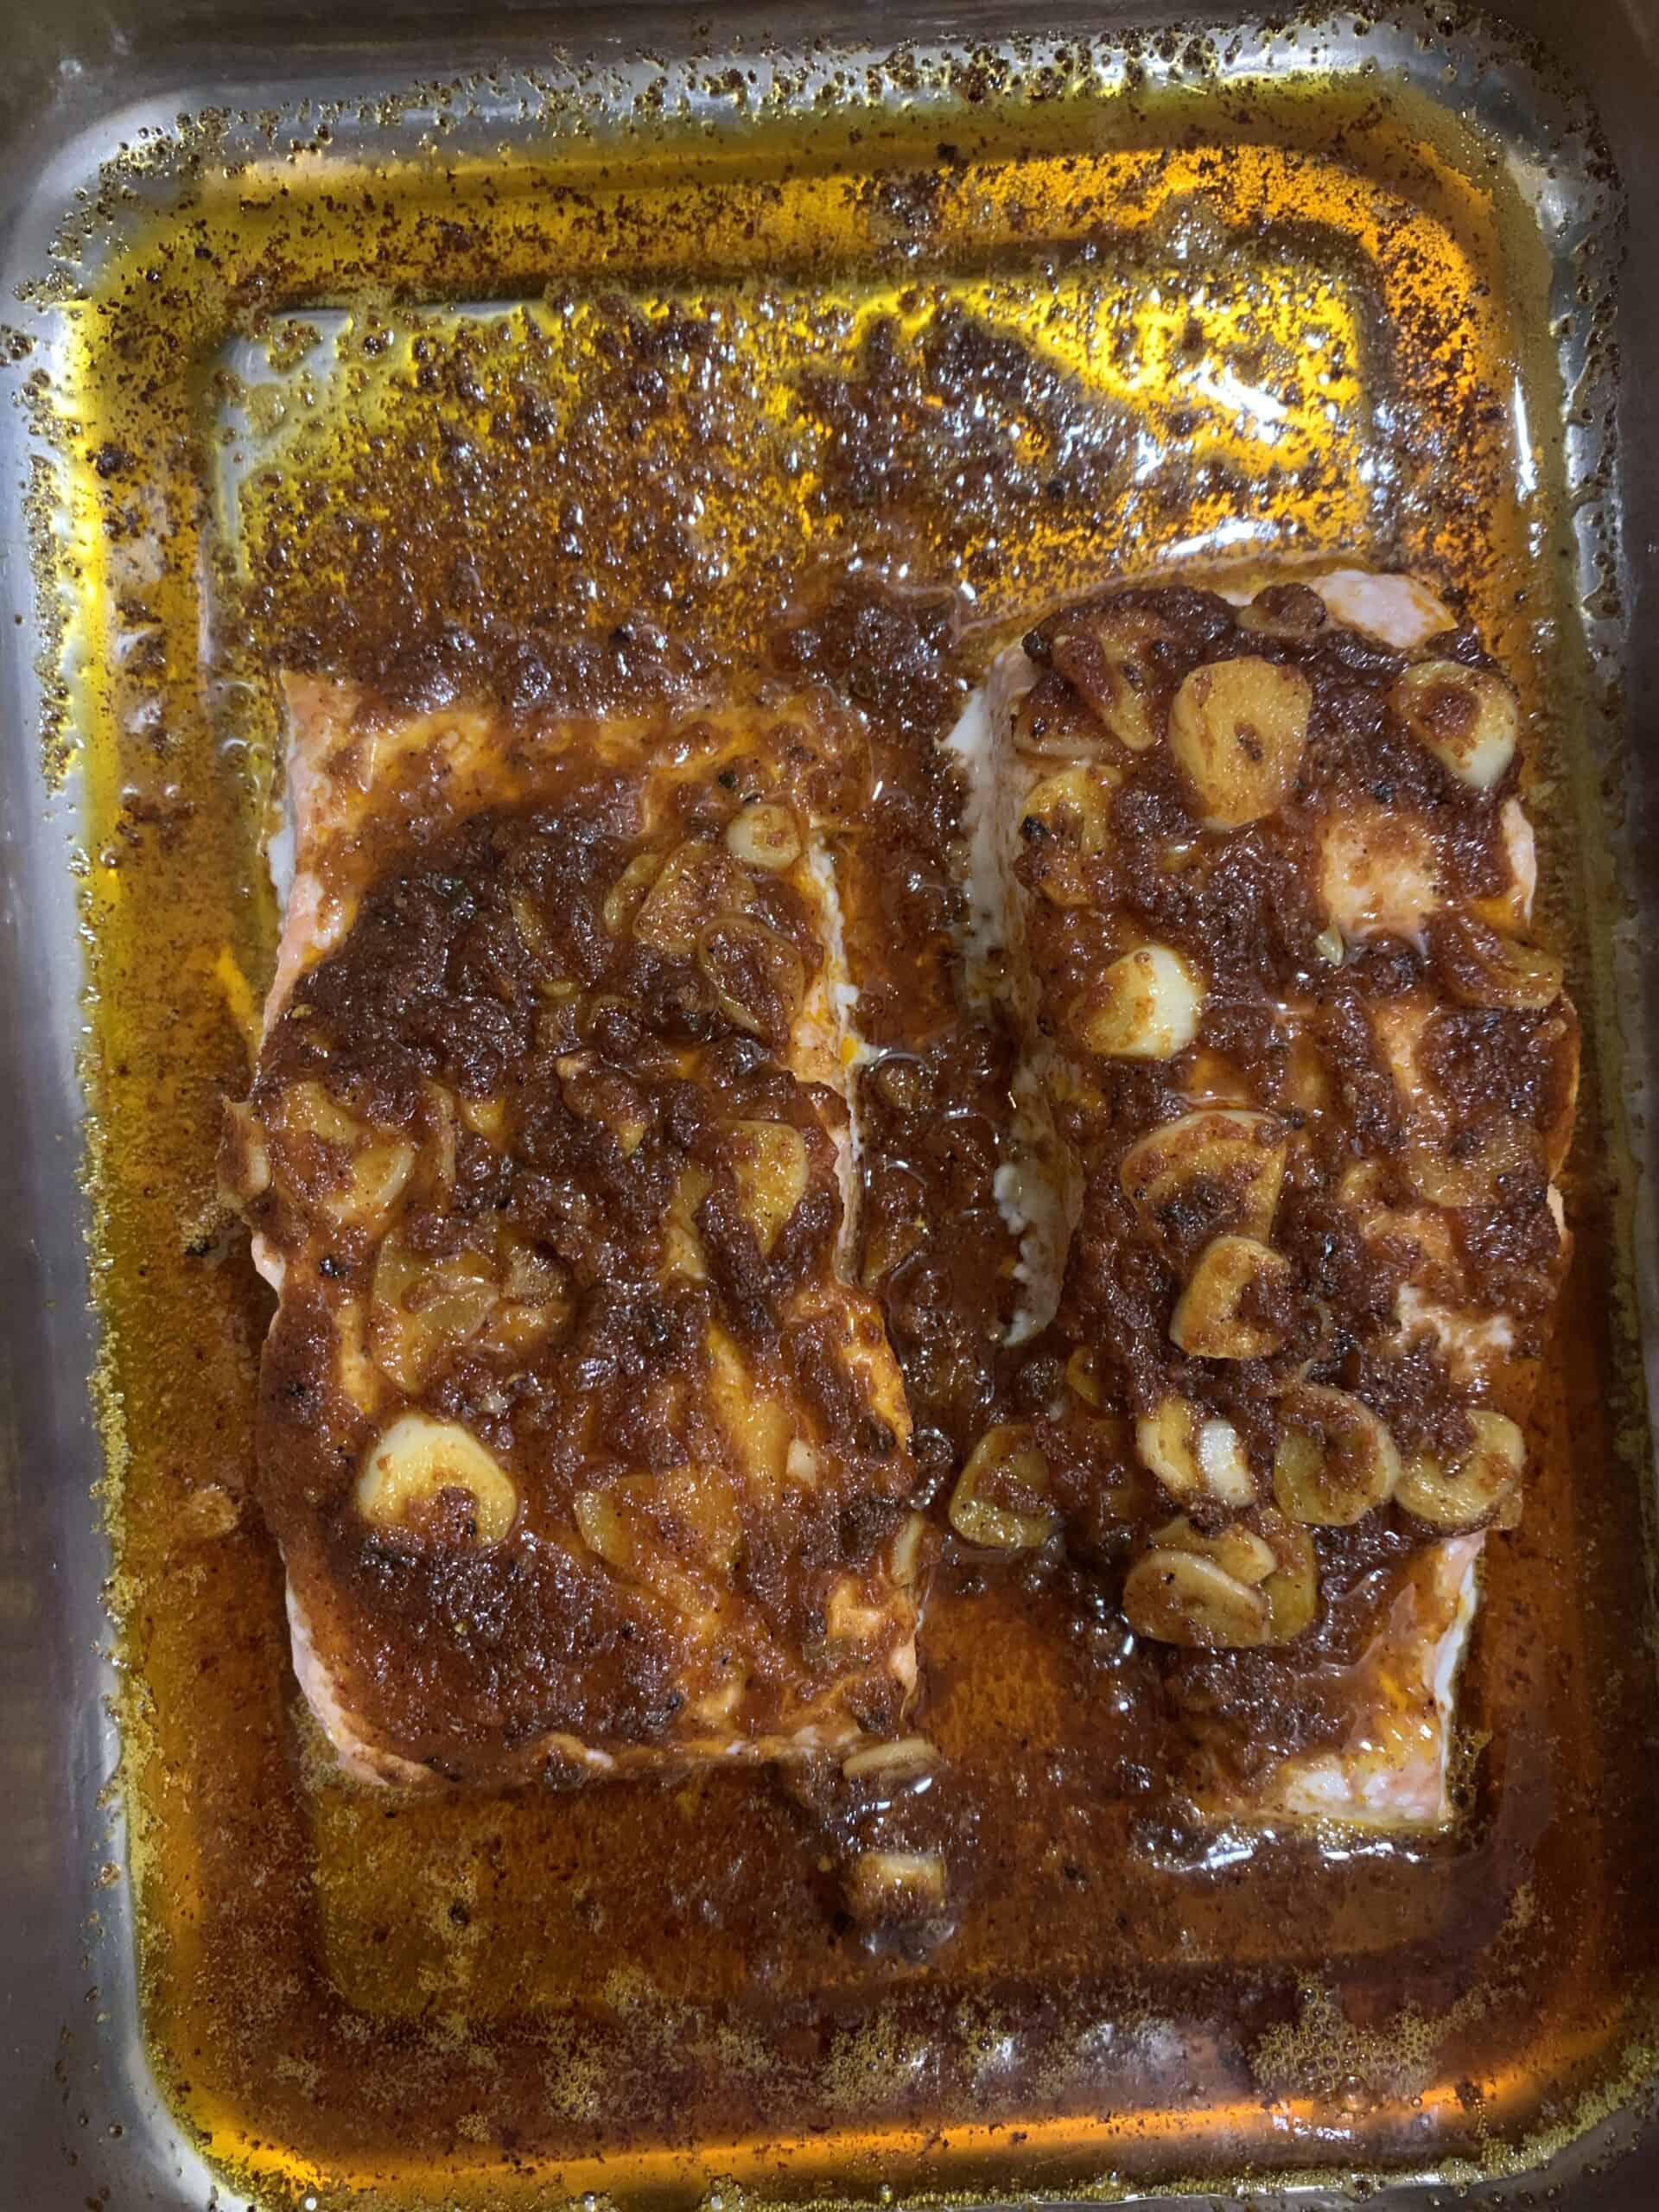 Cooked salmon in a baking tray